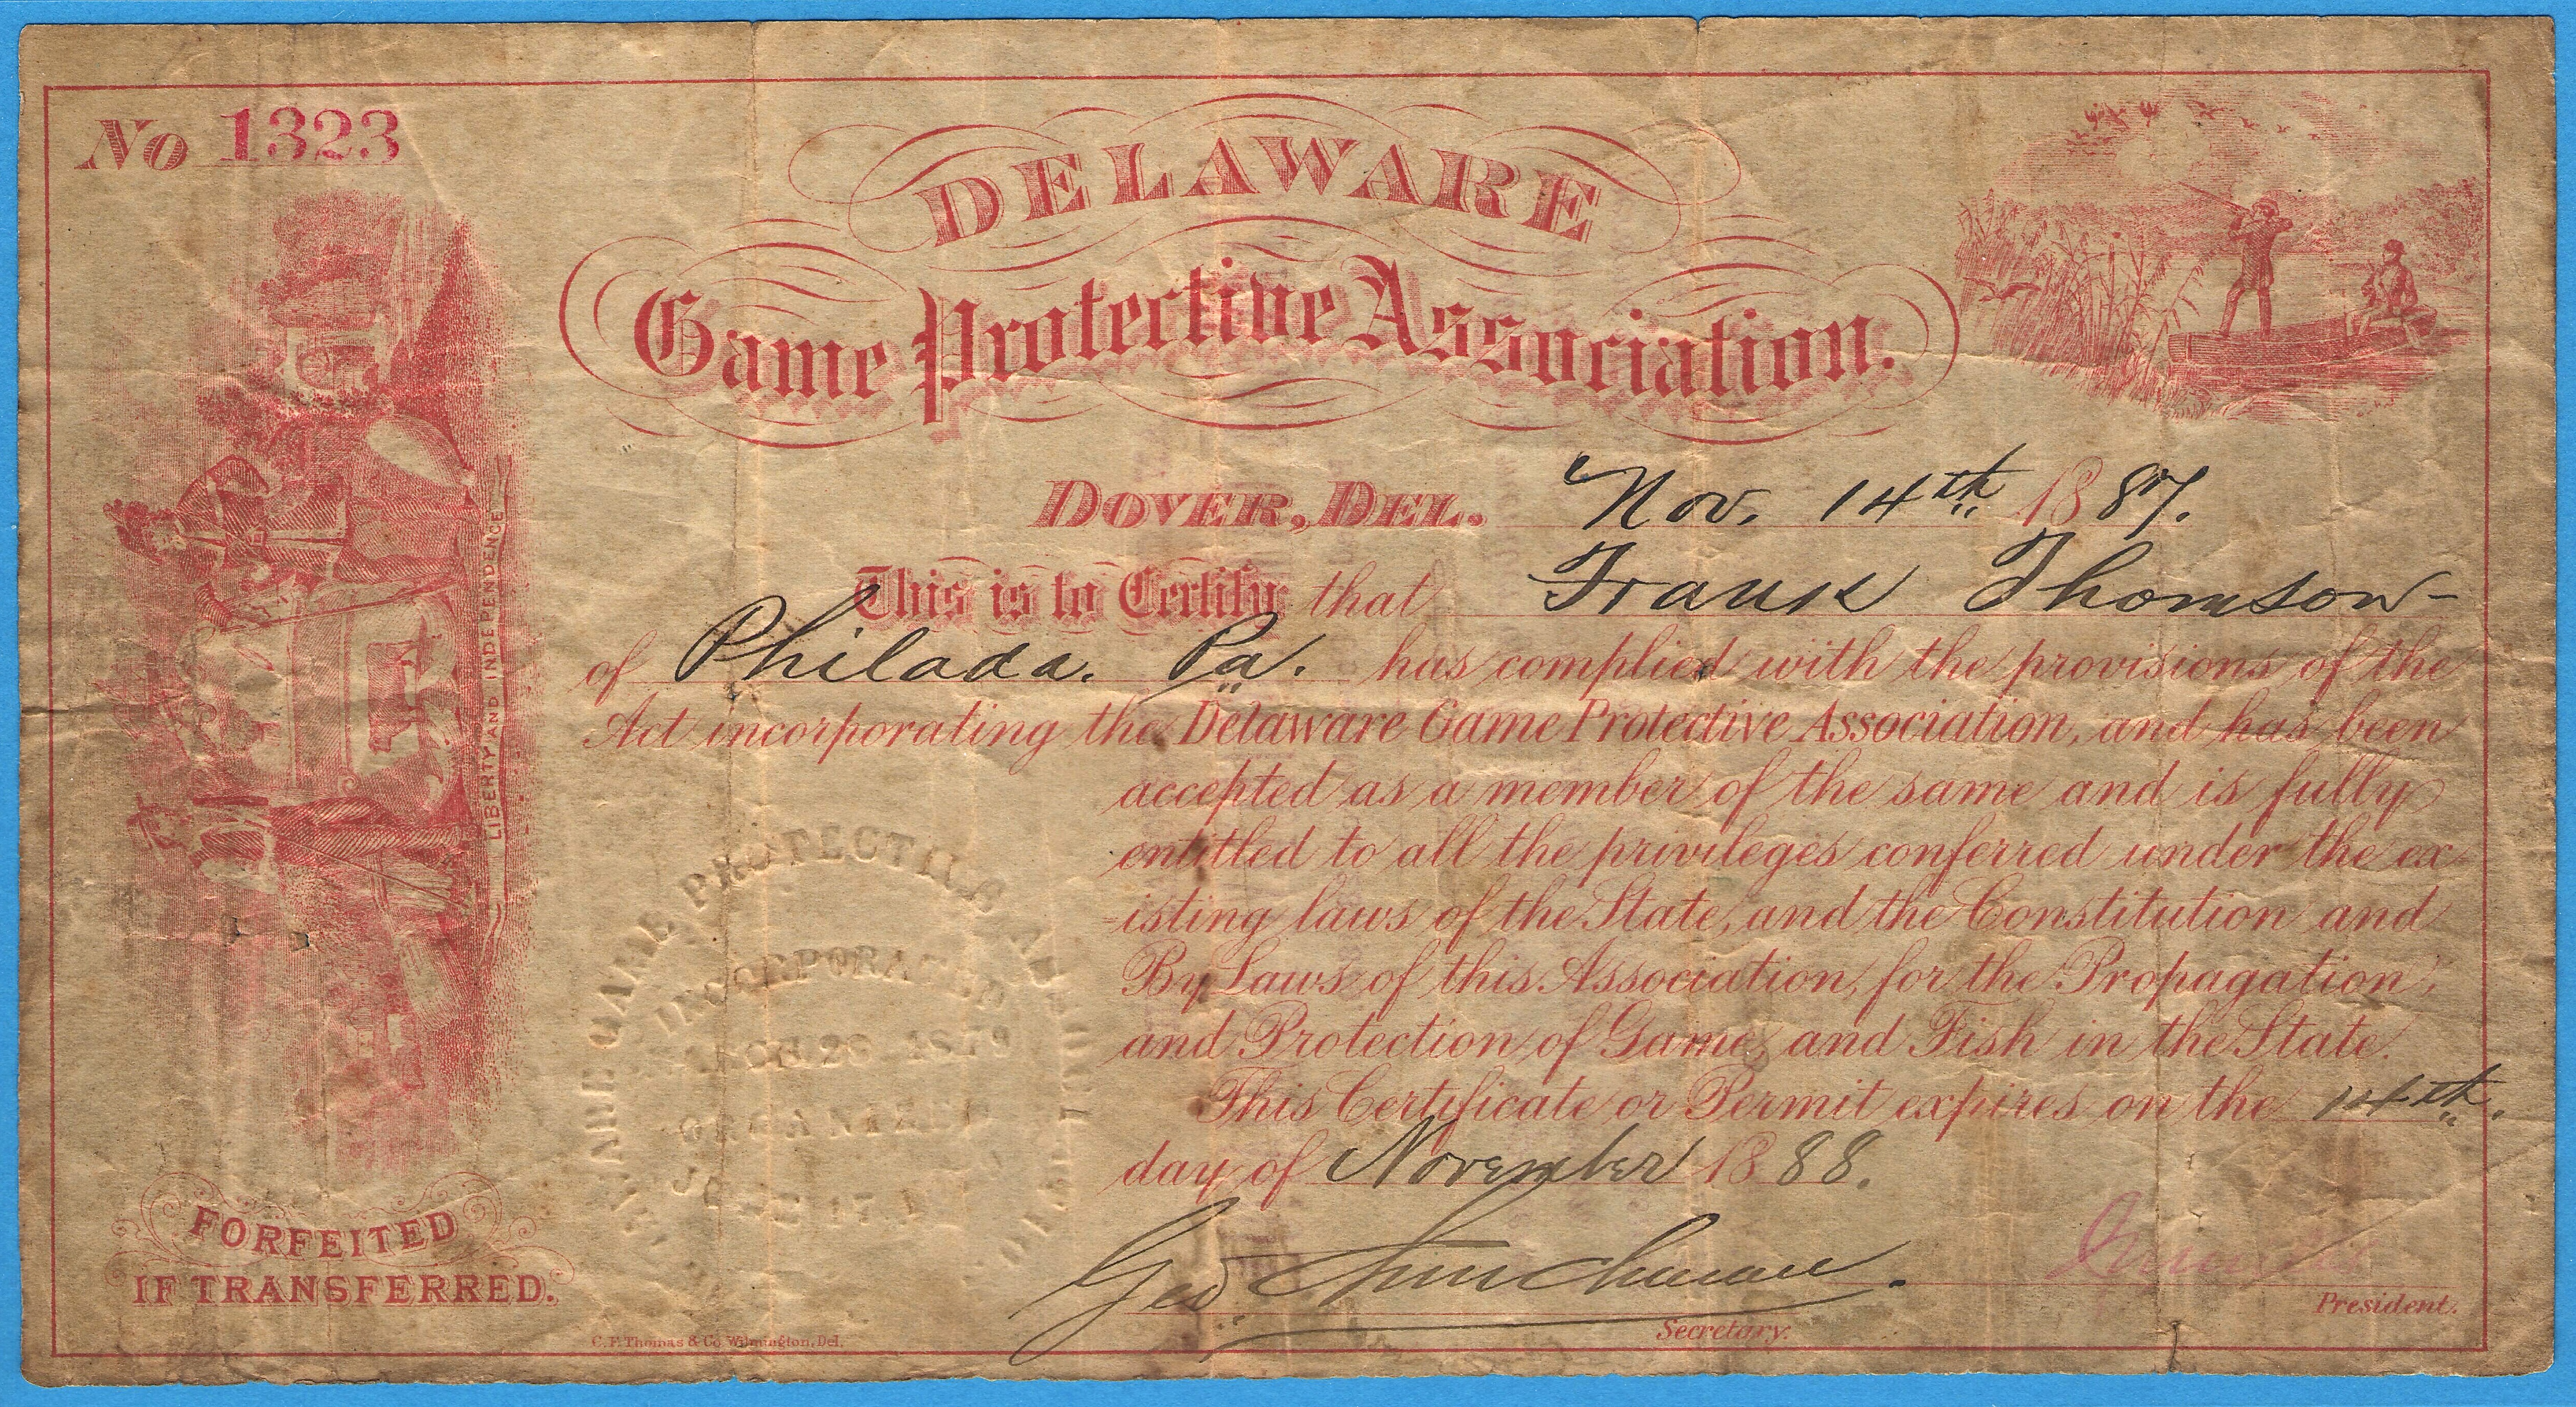 1887 Delaware Game Protective Association Certificate